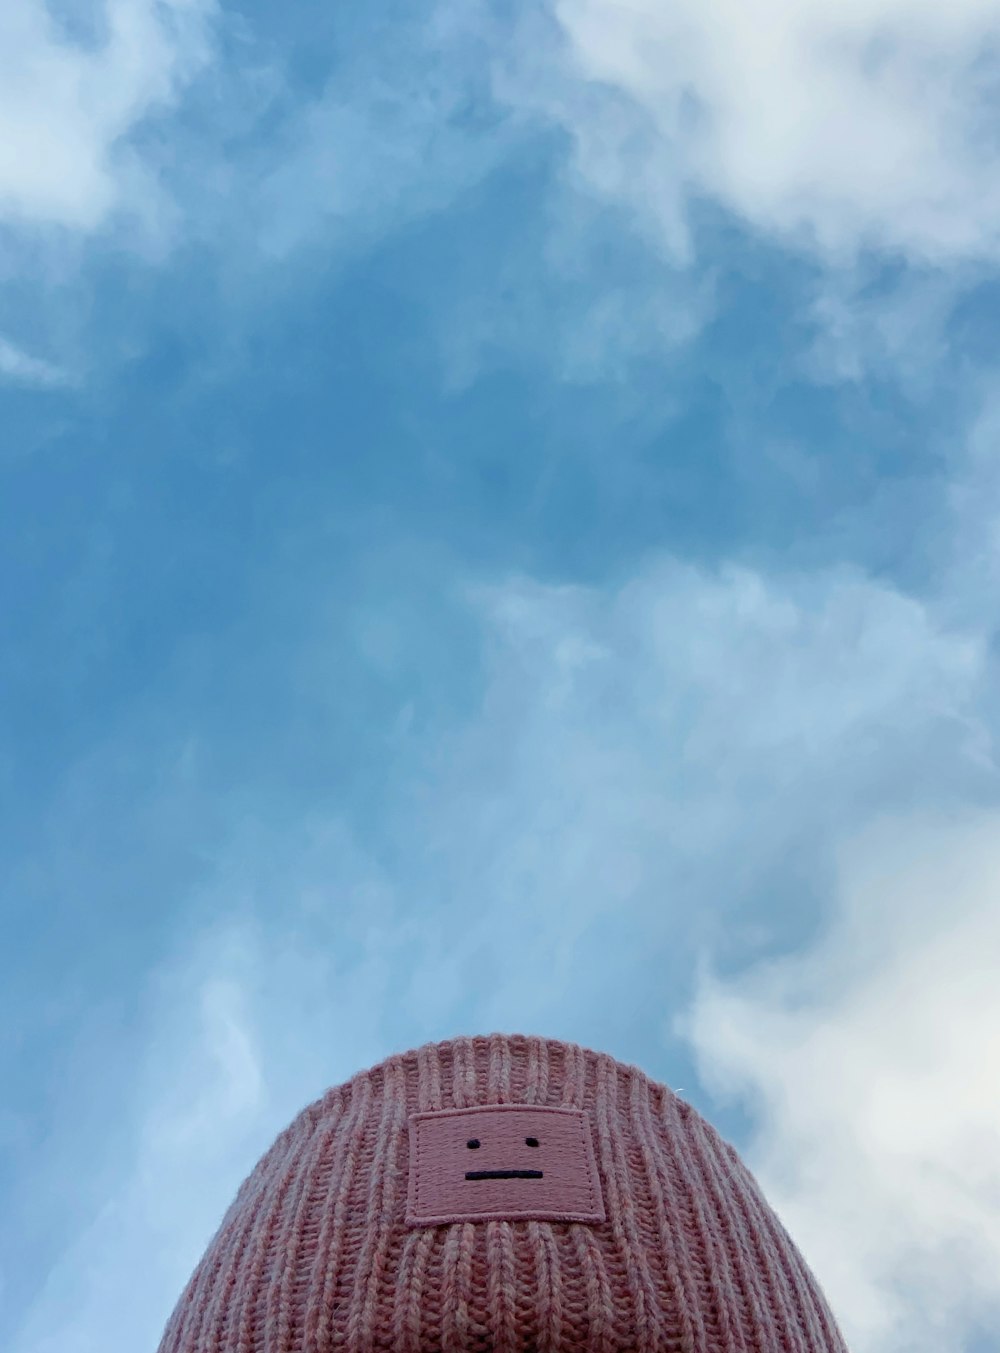 pink dome building under blue sky